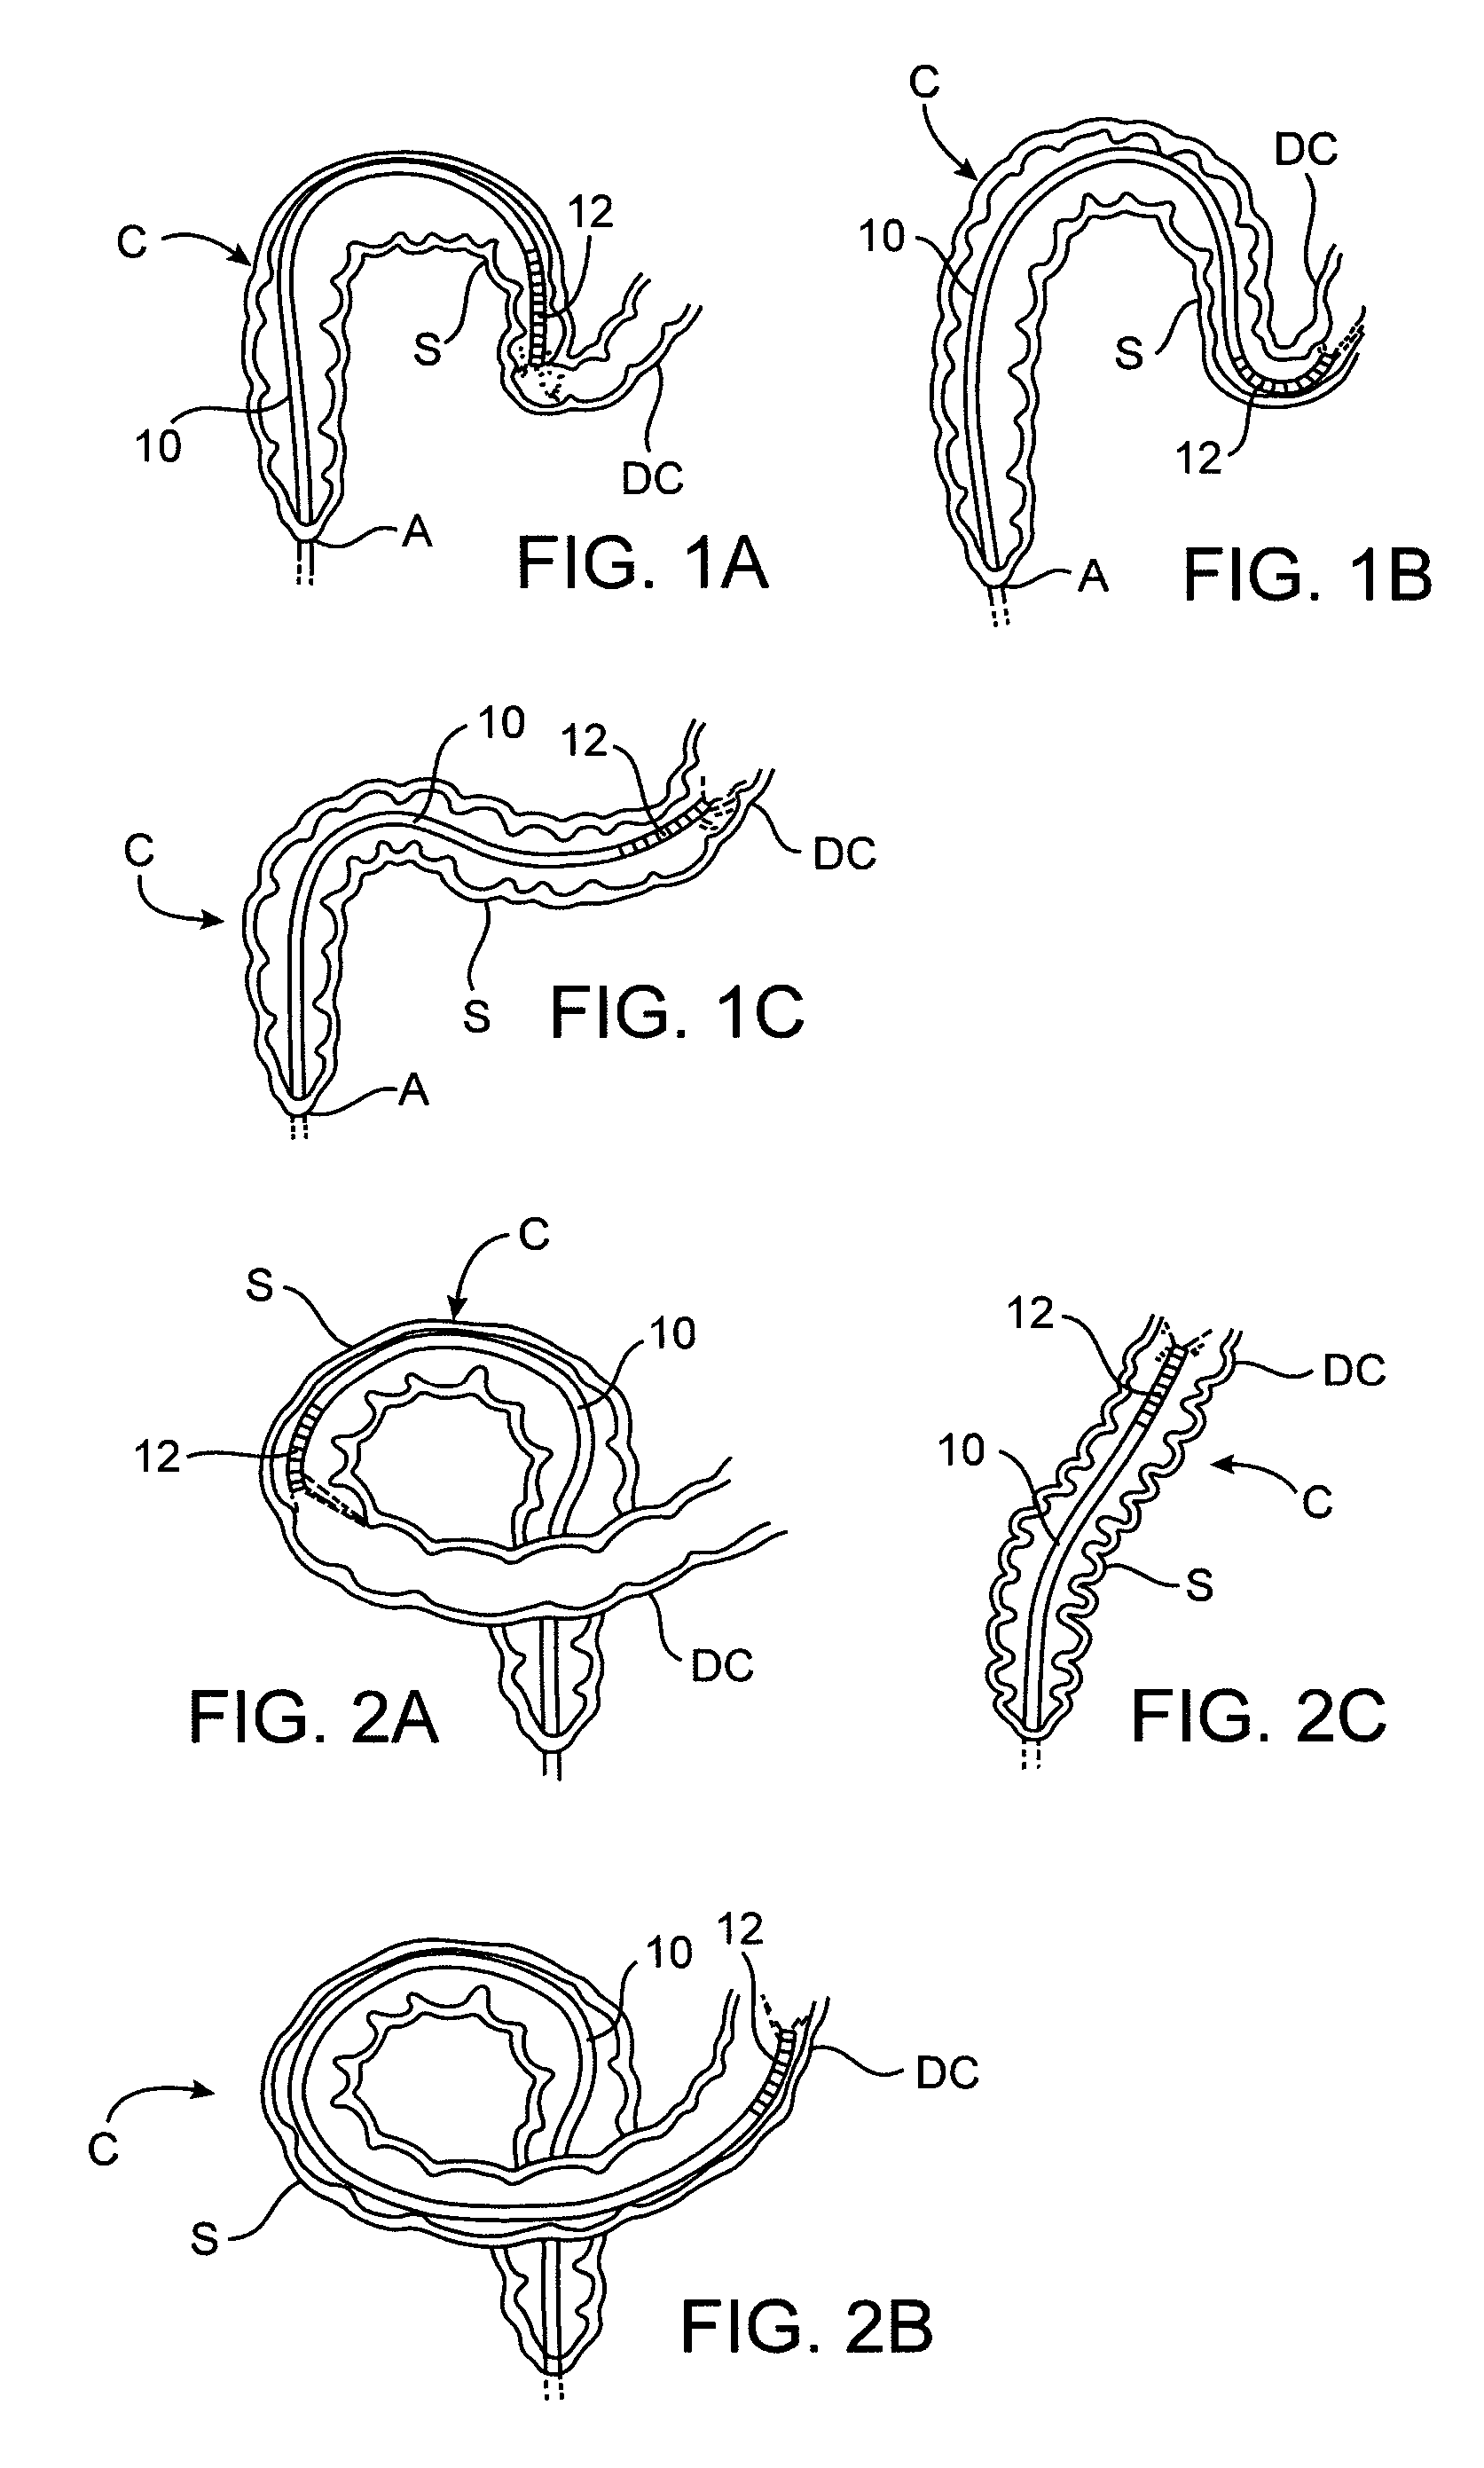 Apparatus and methods for achieving endoluminal access